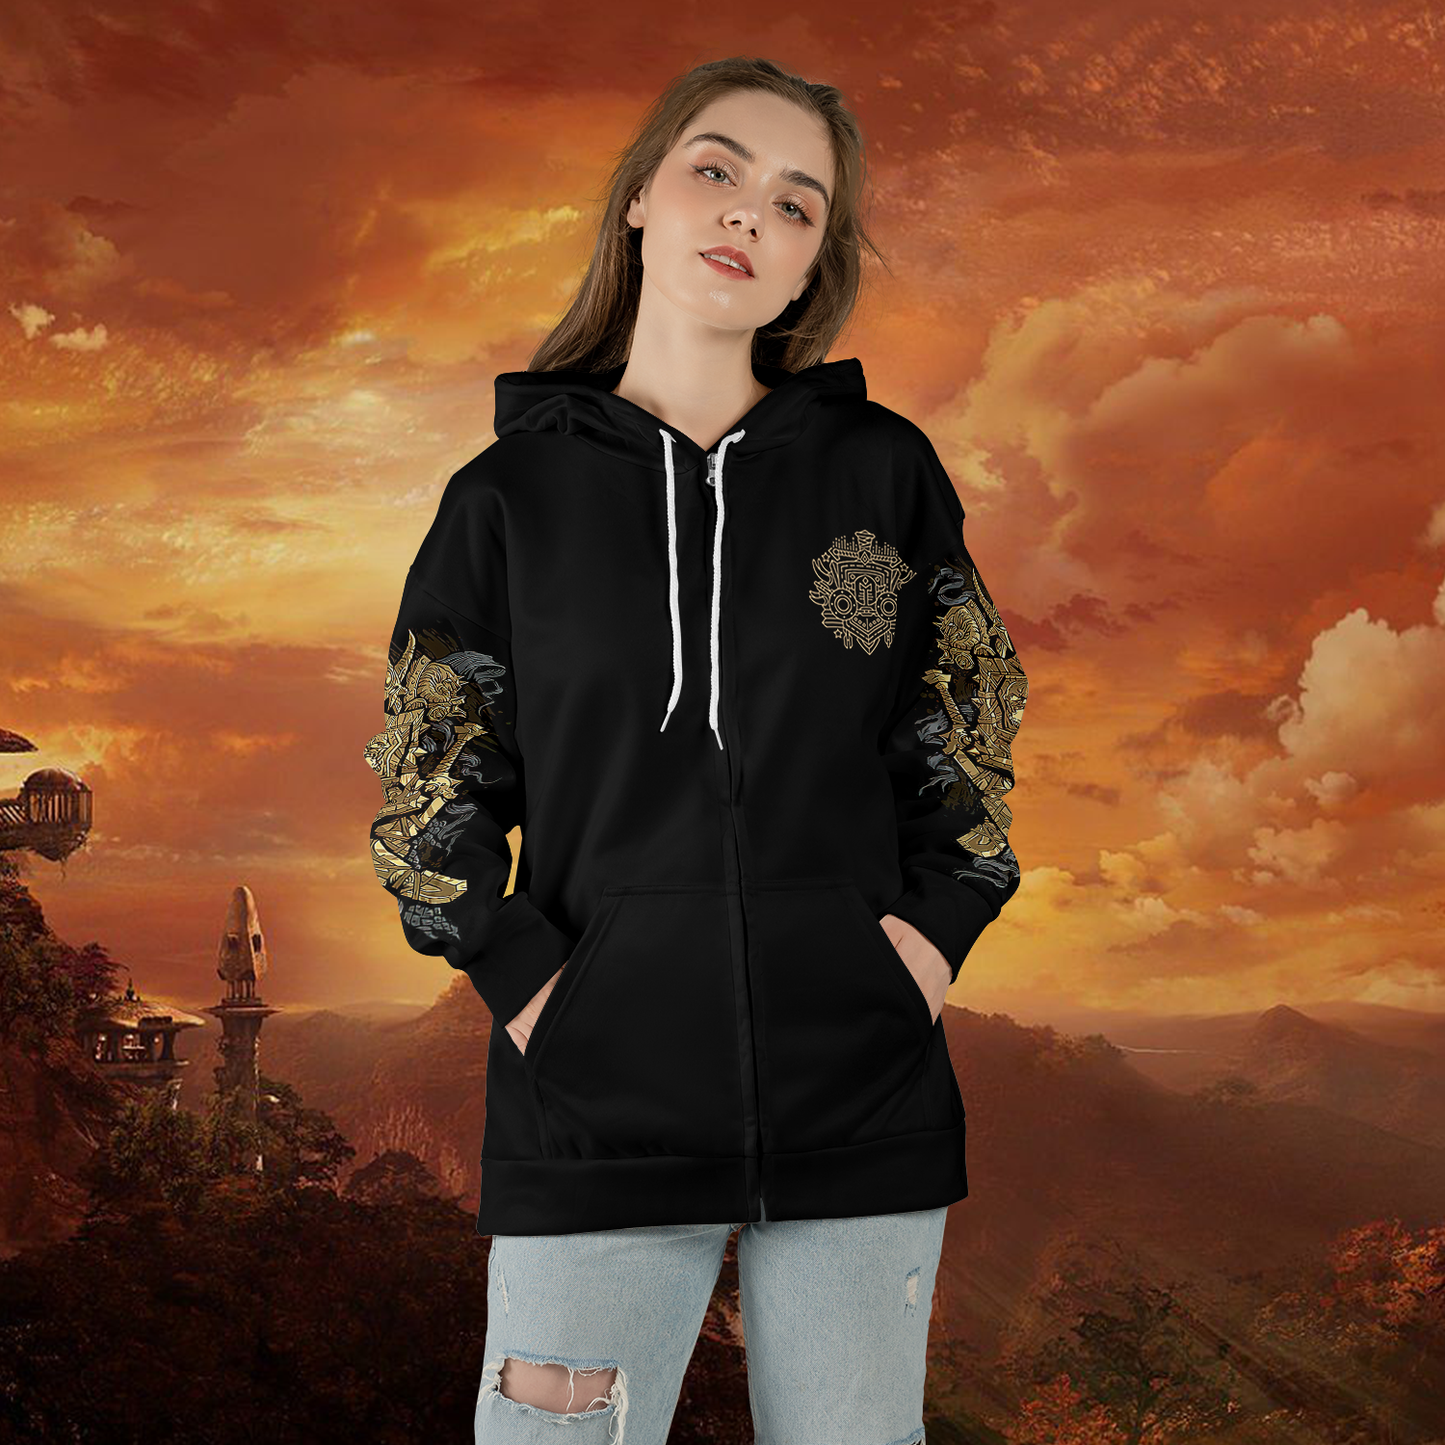 WoW Warrior Class Definition Icon V1 All-over Print Zip Hoodie